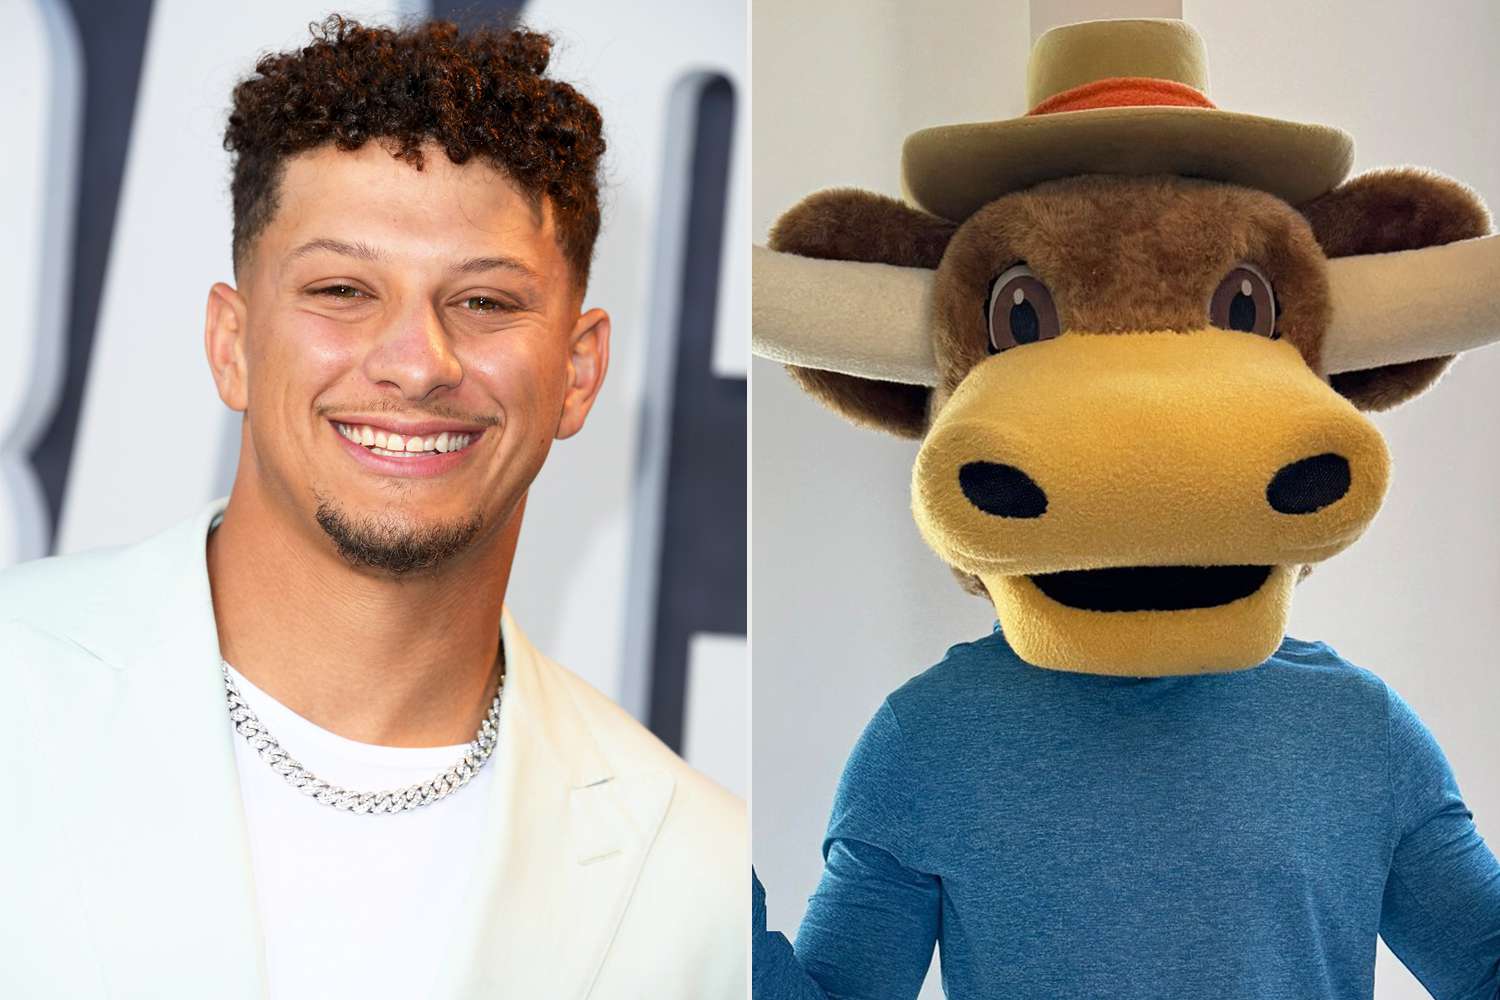 After His Defeat to Shane Buechele in the March Madness Bet, Patrick Mahomes Dons a Cow Costume